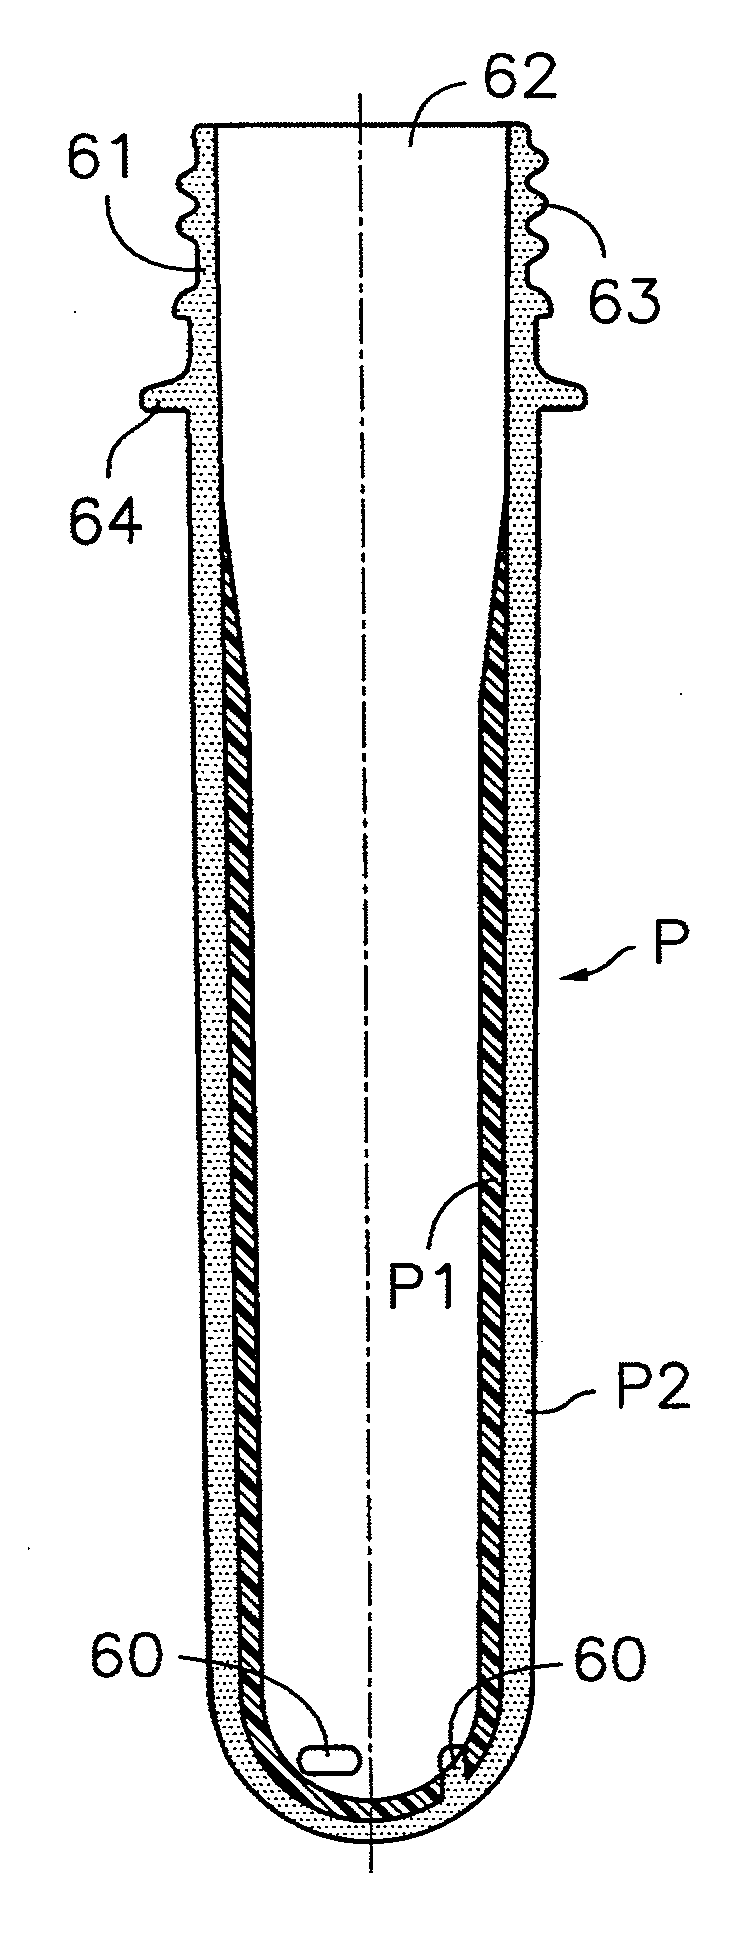 Two-layered preform obtained by injection overmolding